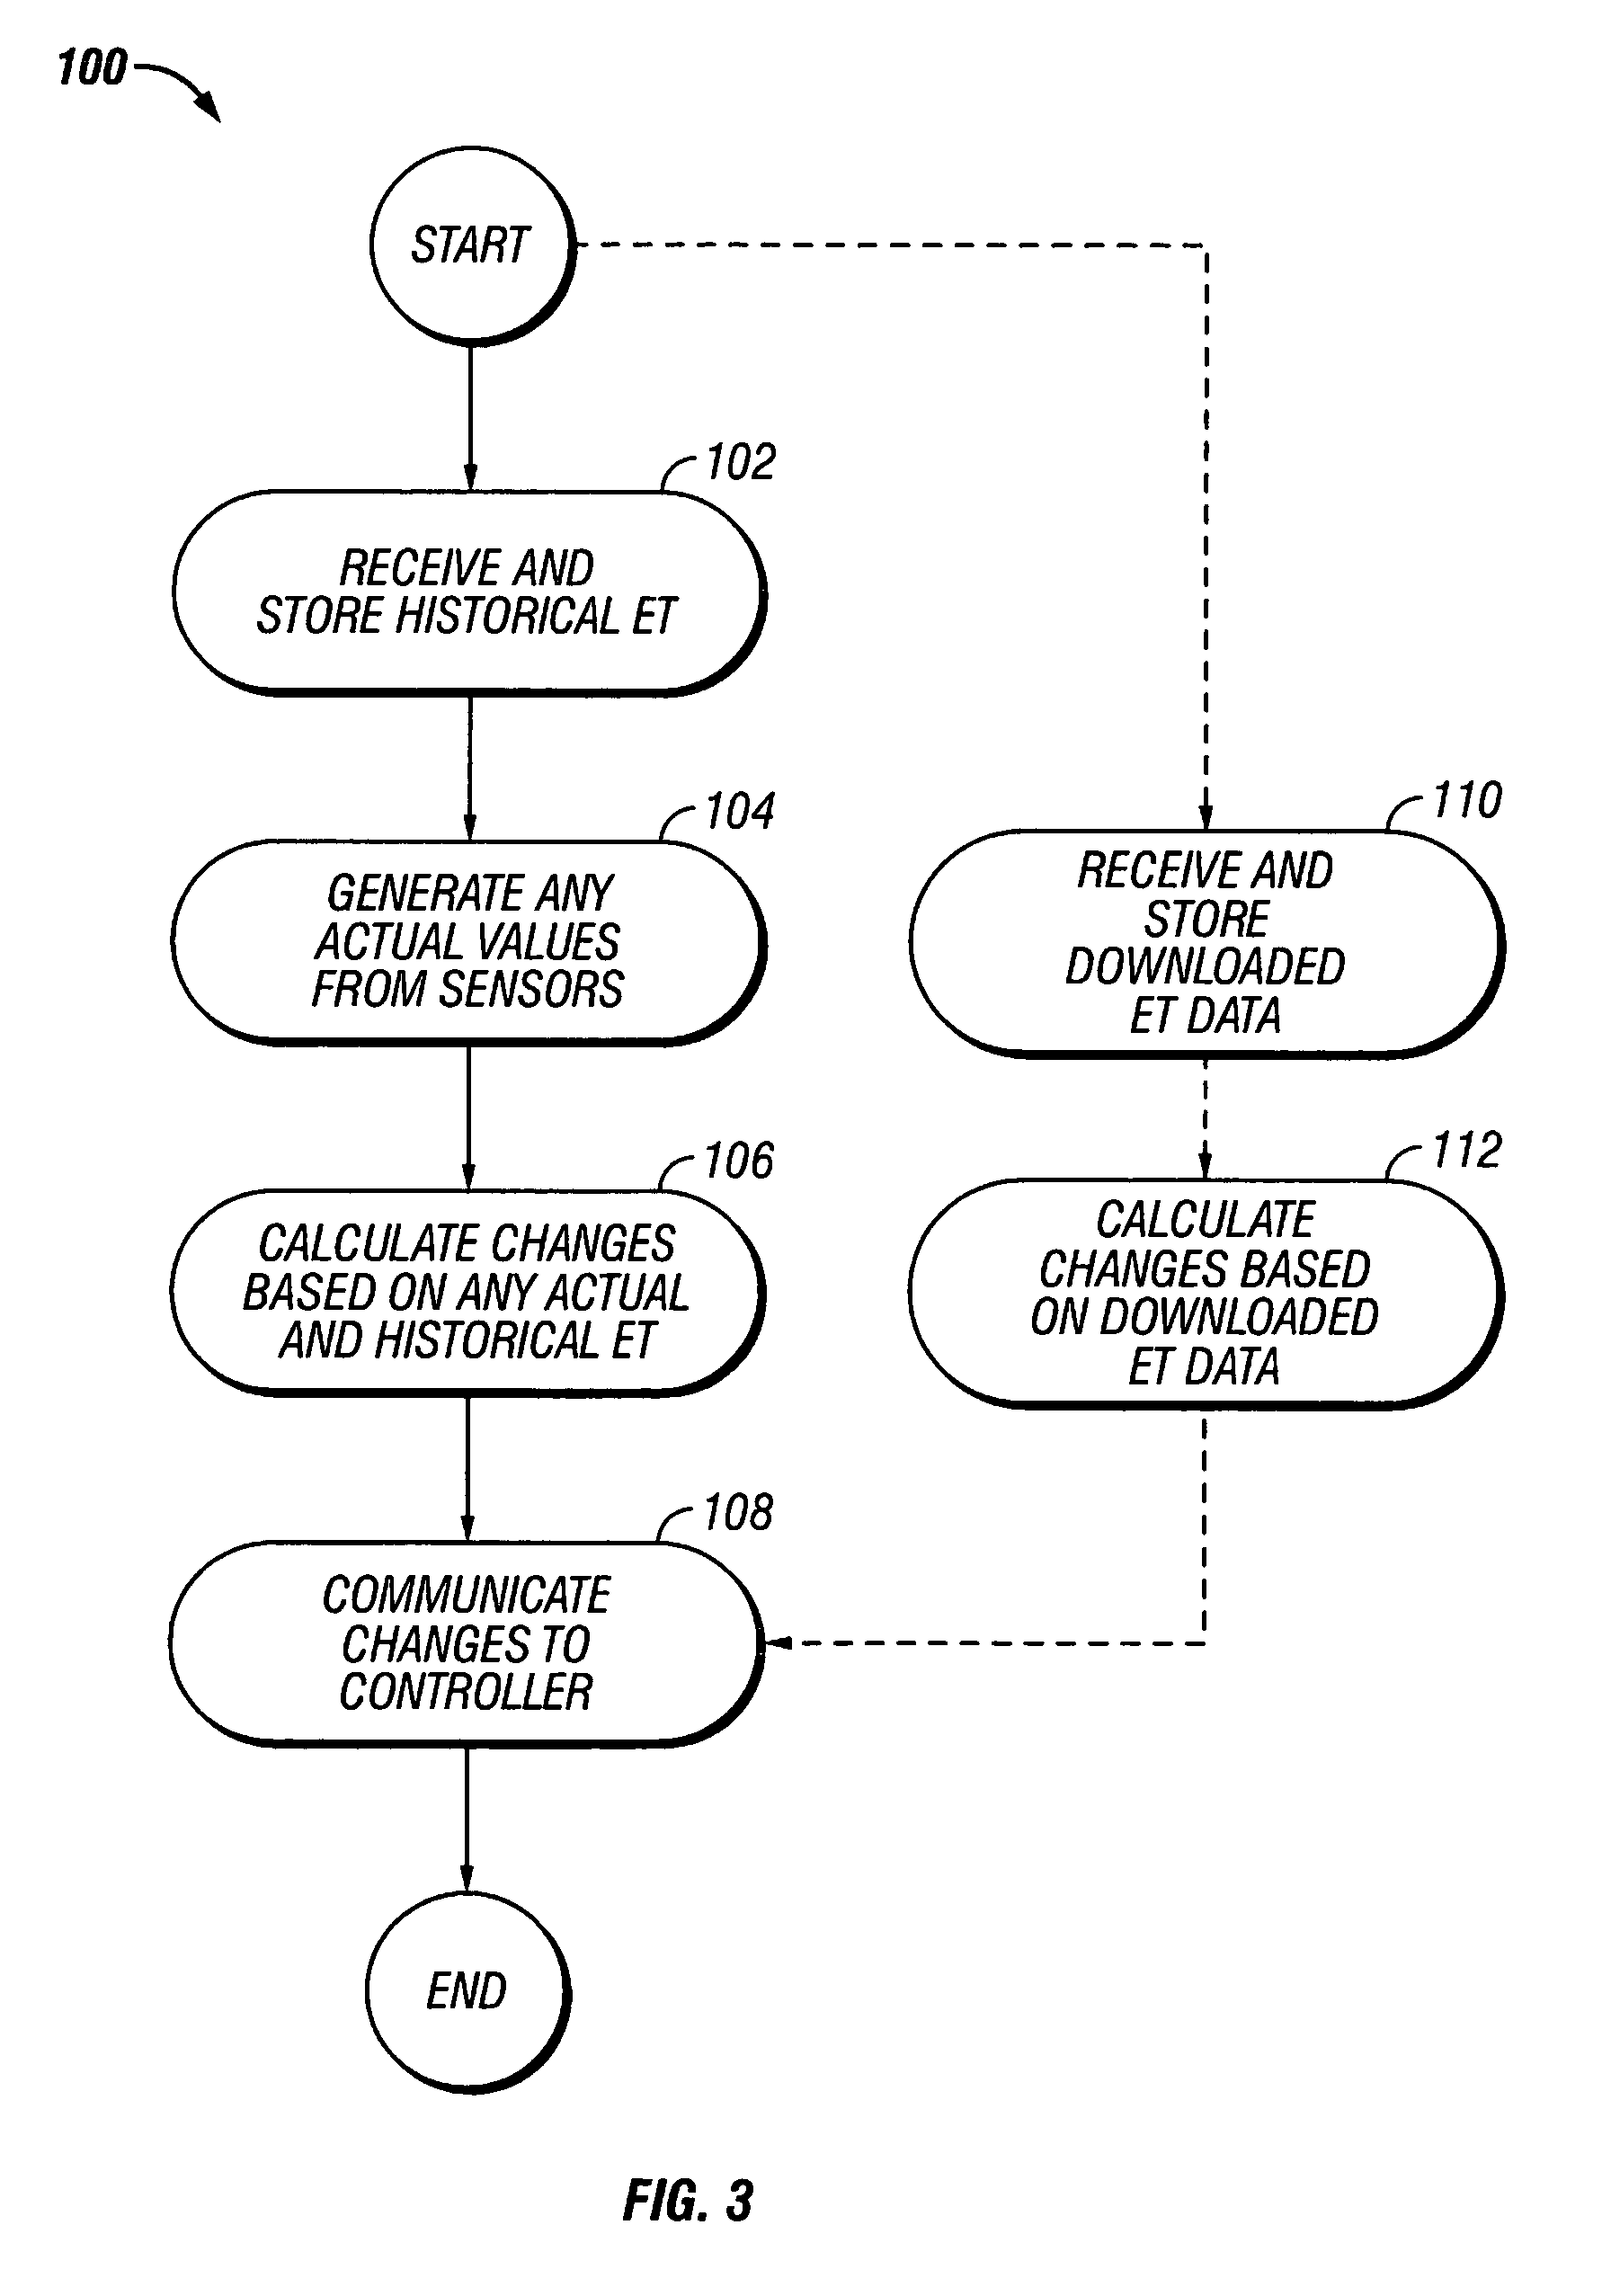 Evapotranspiration unit connectable to an irrigation controller